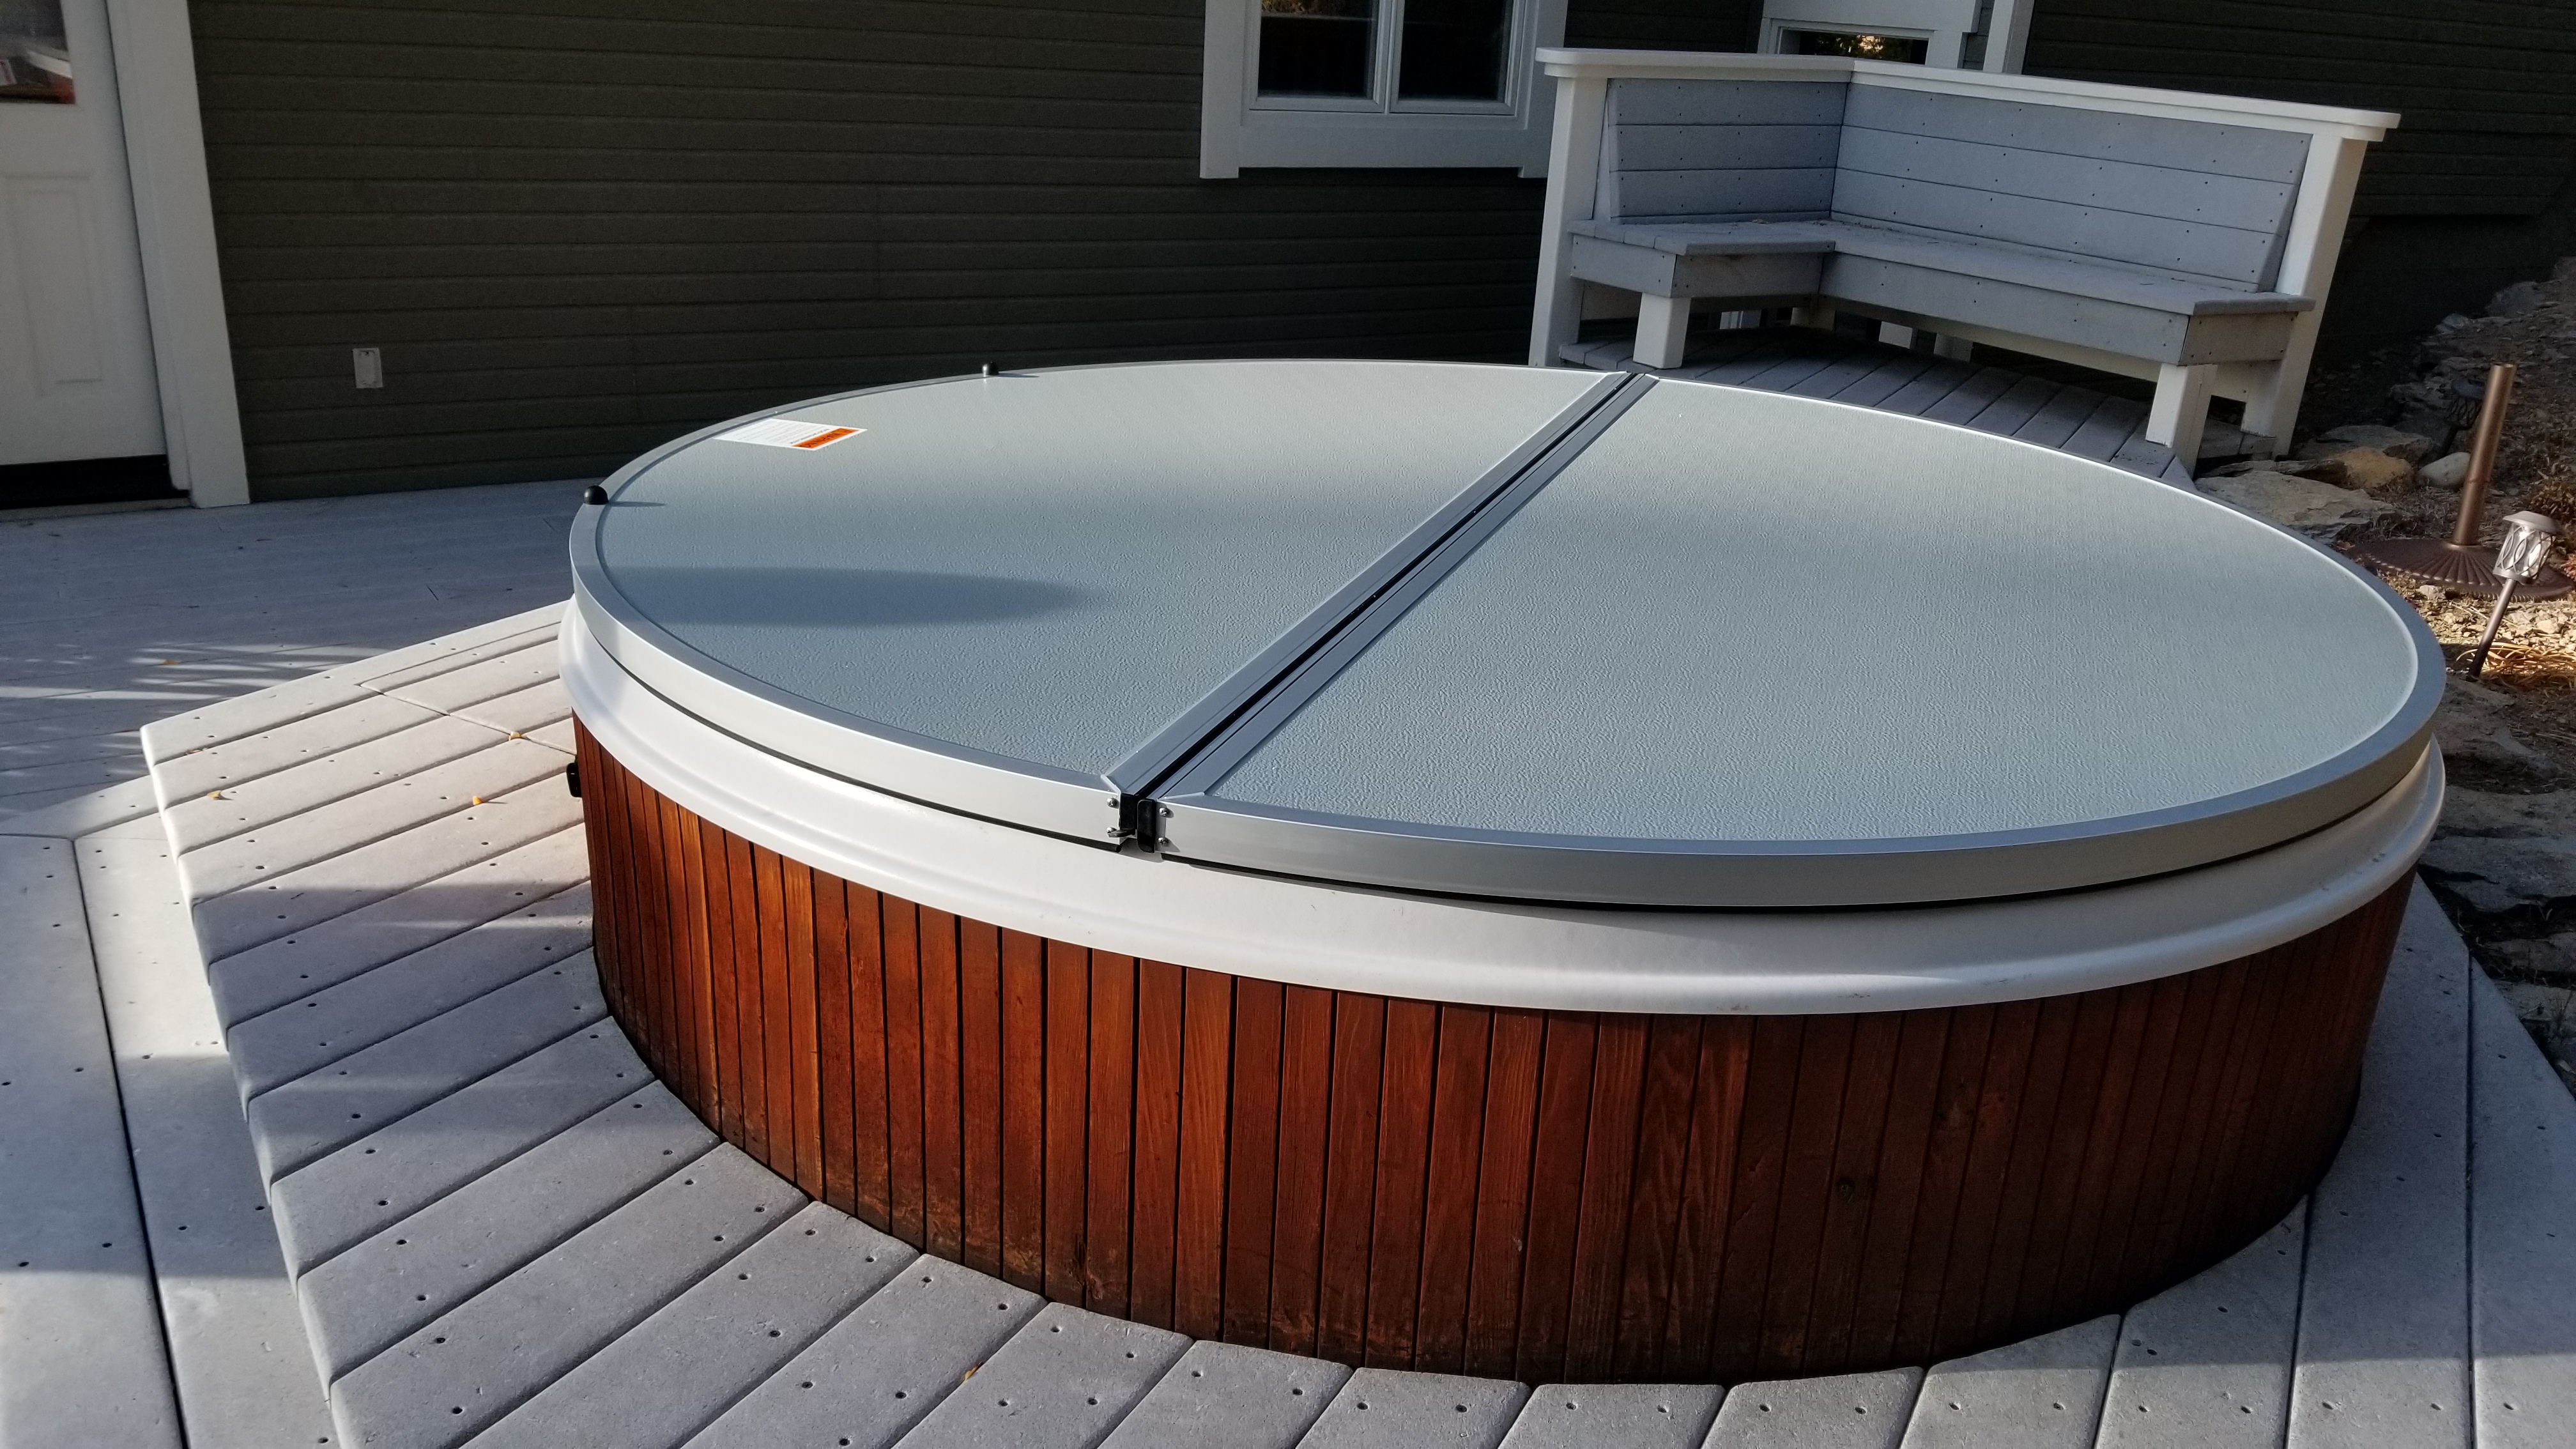 Gallery Be Lite Aluminum Spa Covers, Round Spa Cover